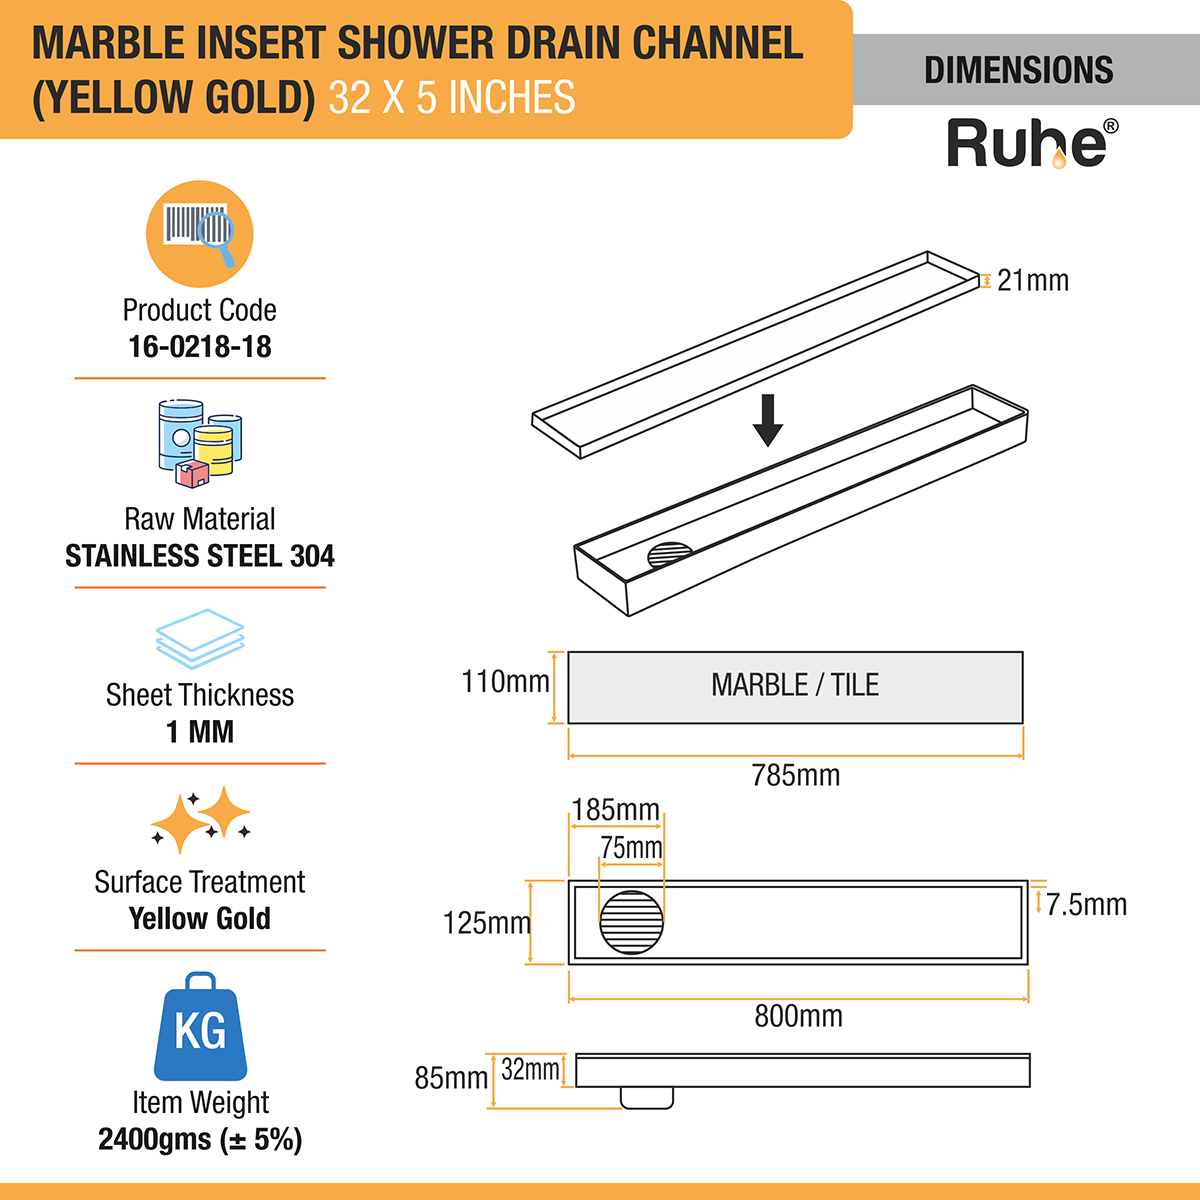 Marble Insert Shower Drain Channel (32 x 5 Inches) YELLOW GOLD PVD Coated dimensions and sizes